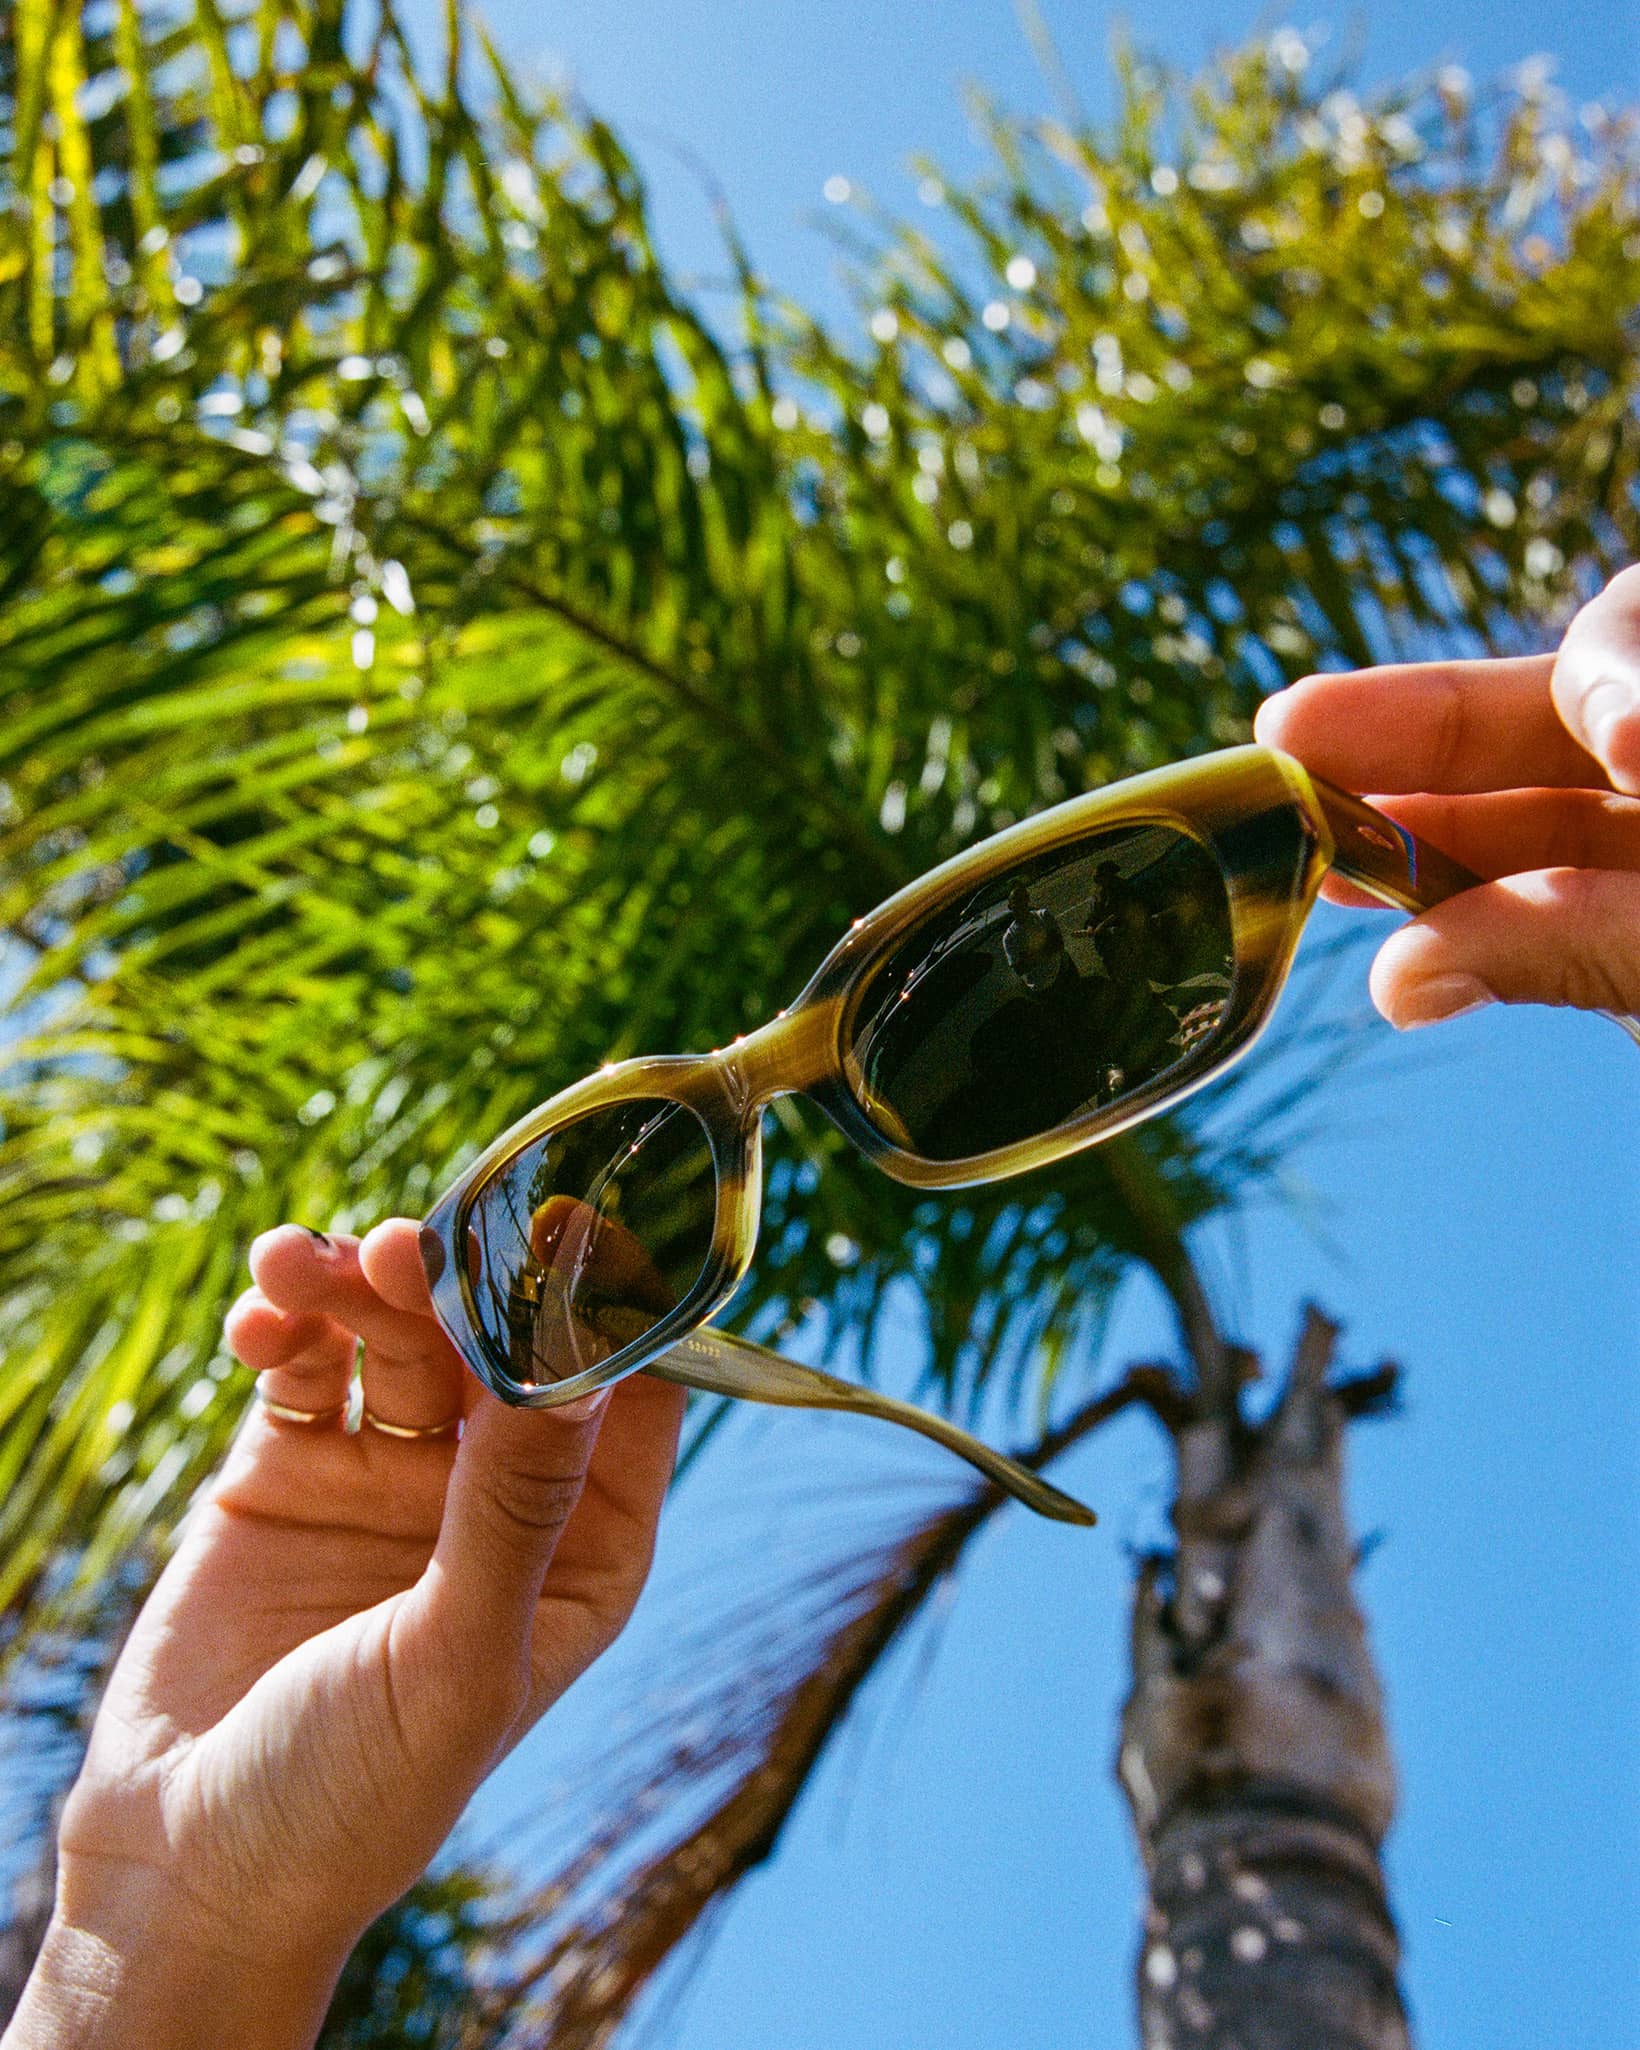 The Gothic Breeze / Frond Bio & Polarized Grapeseed Lens